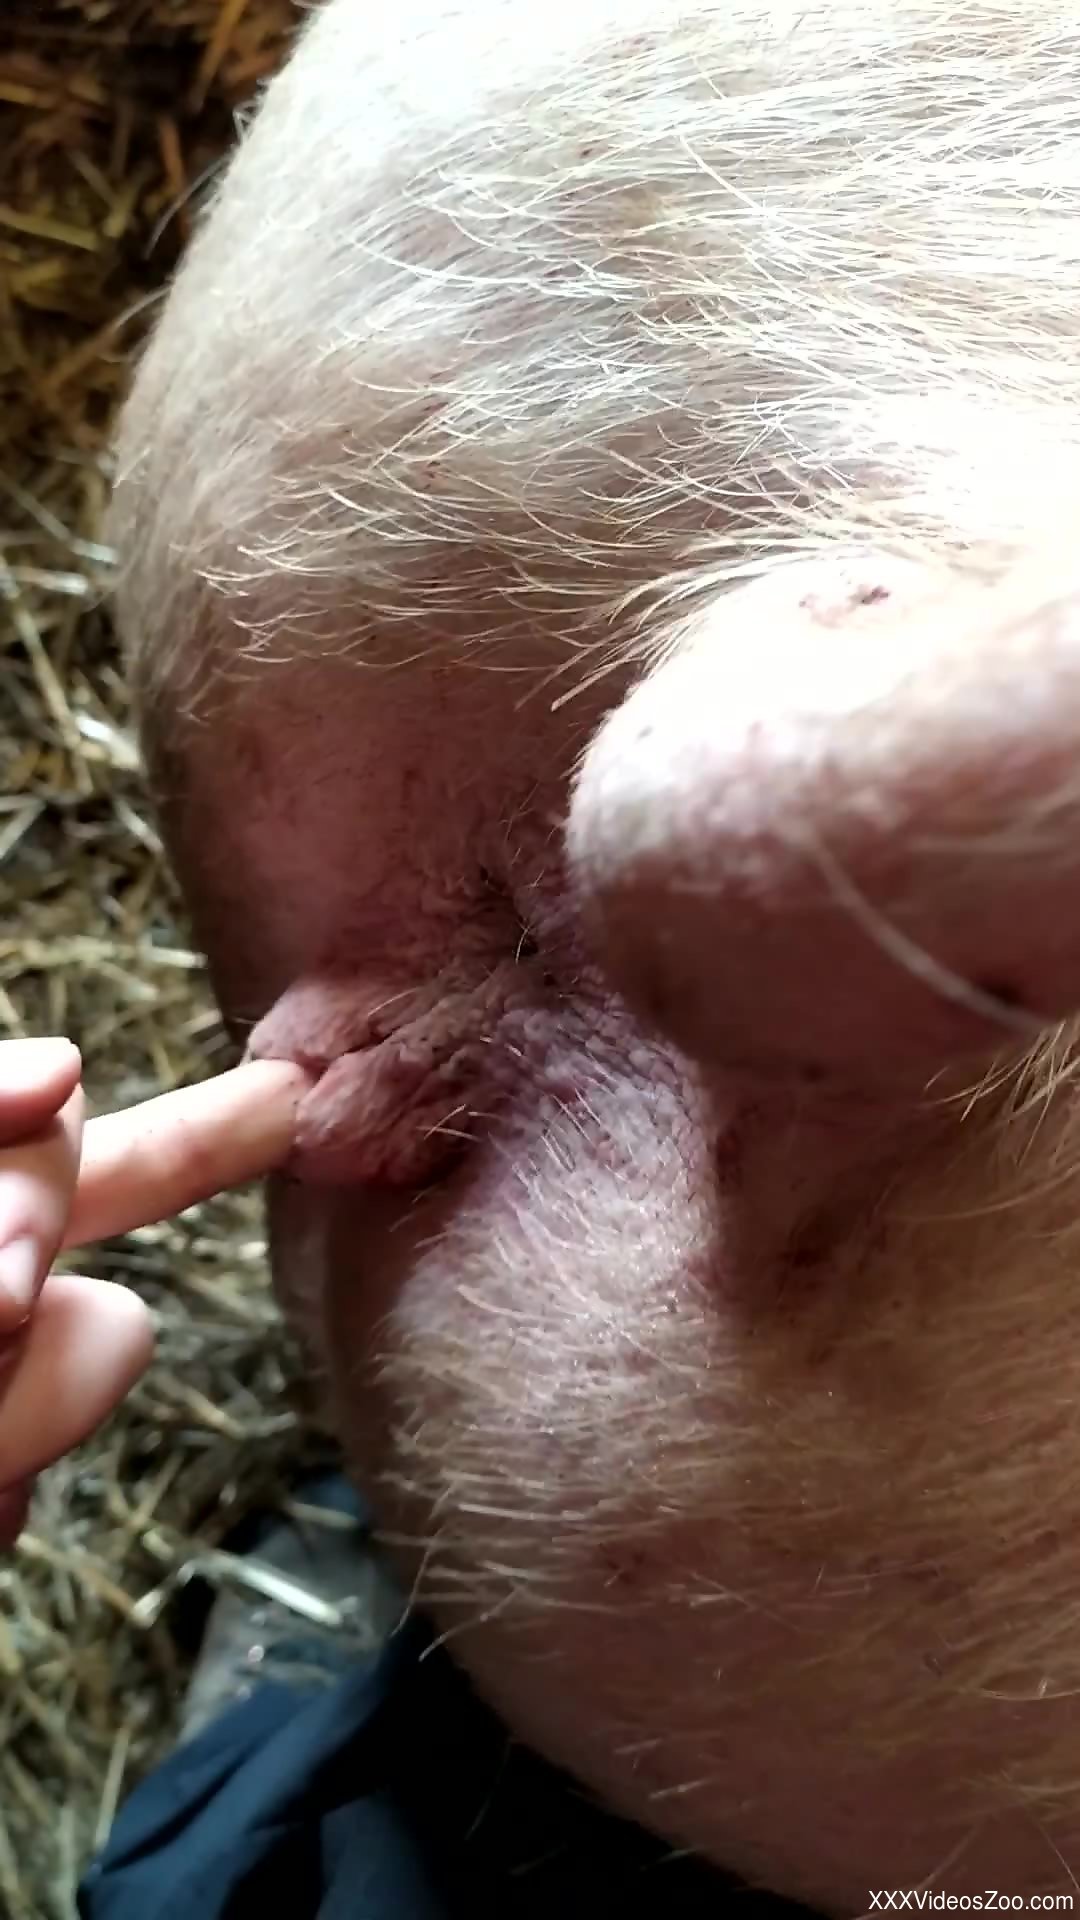 Man suits his sexual needs by fingering the pig